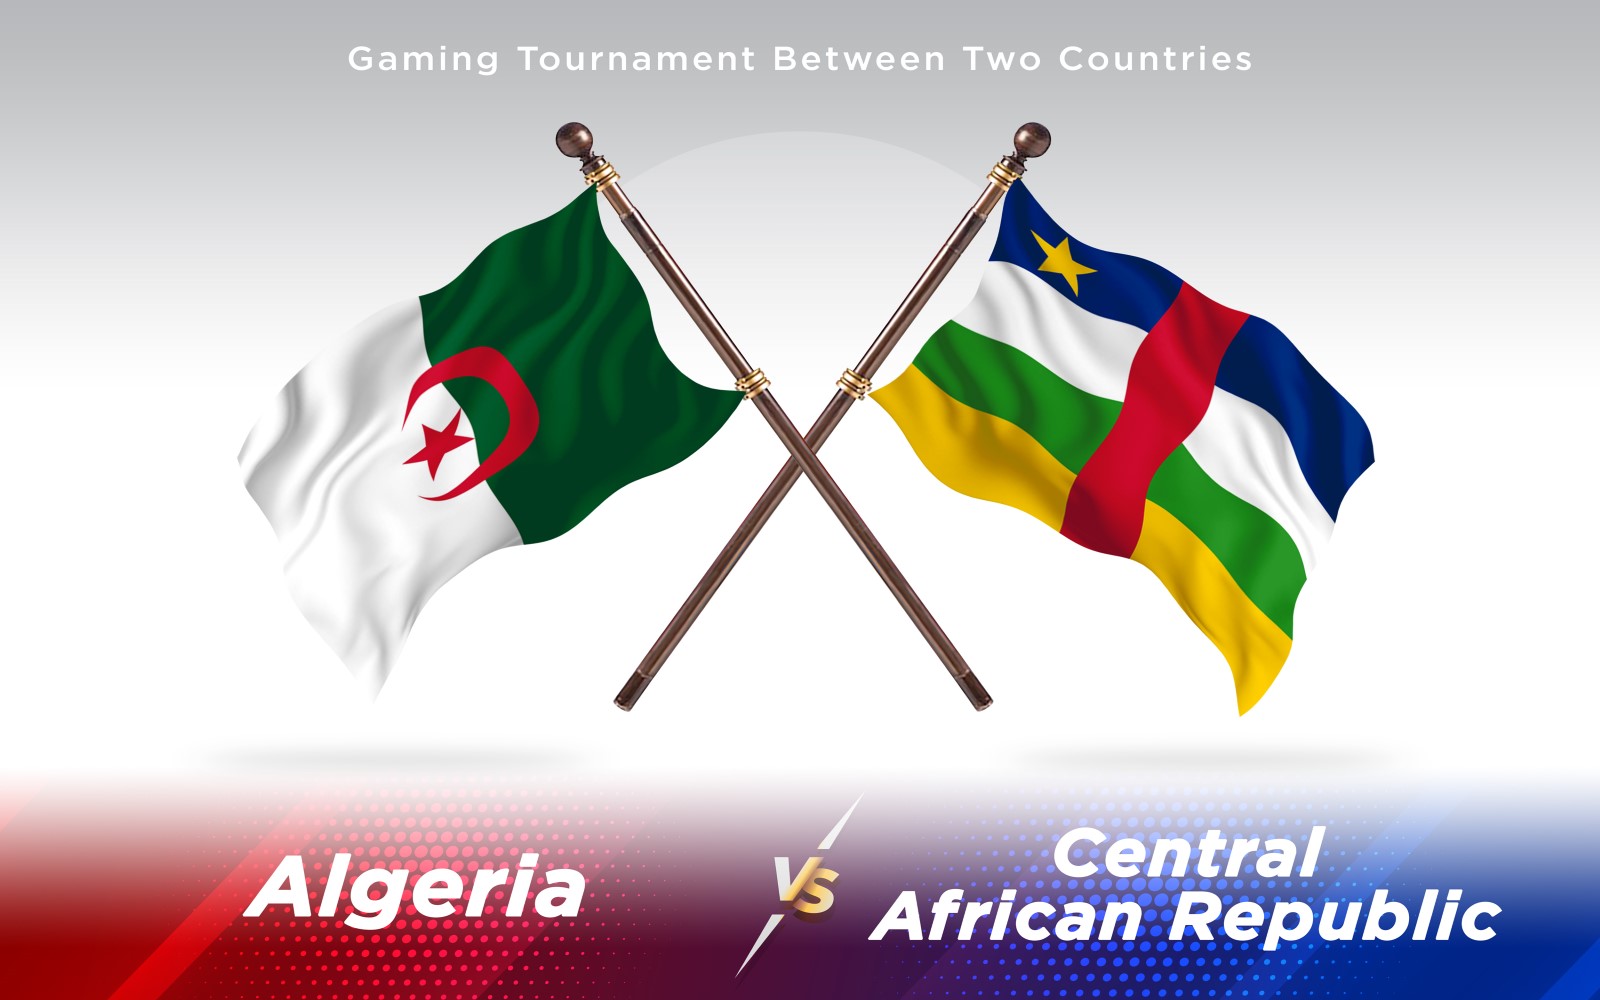 Algeria versus Central African Republic Two Countries Flags - Illustration